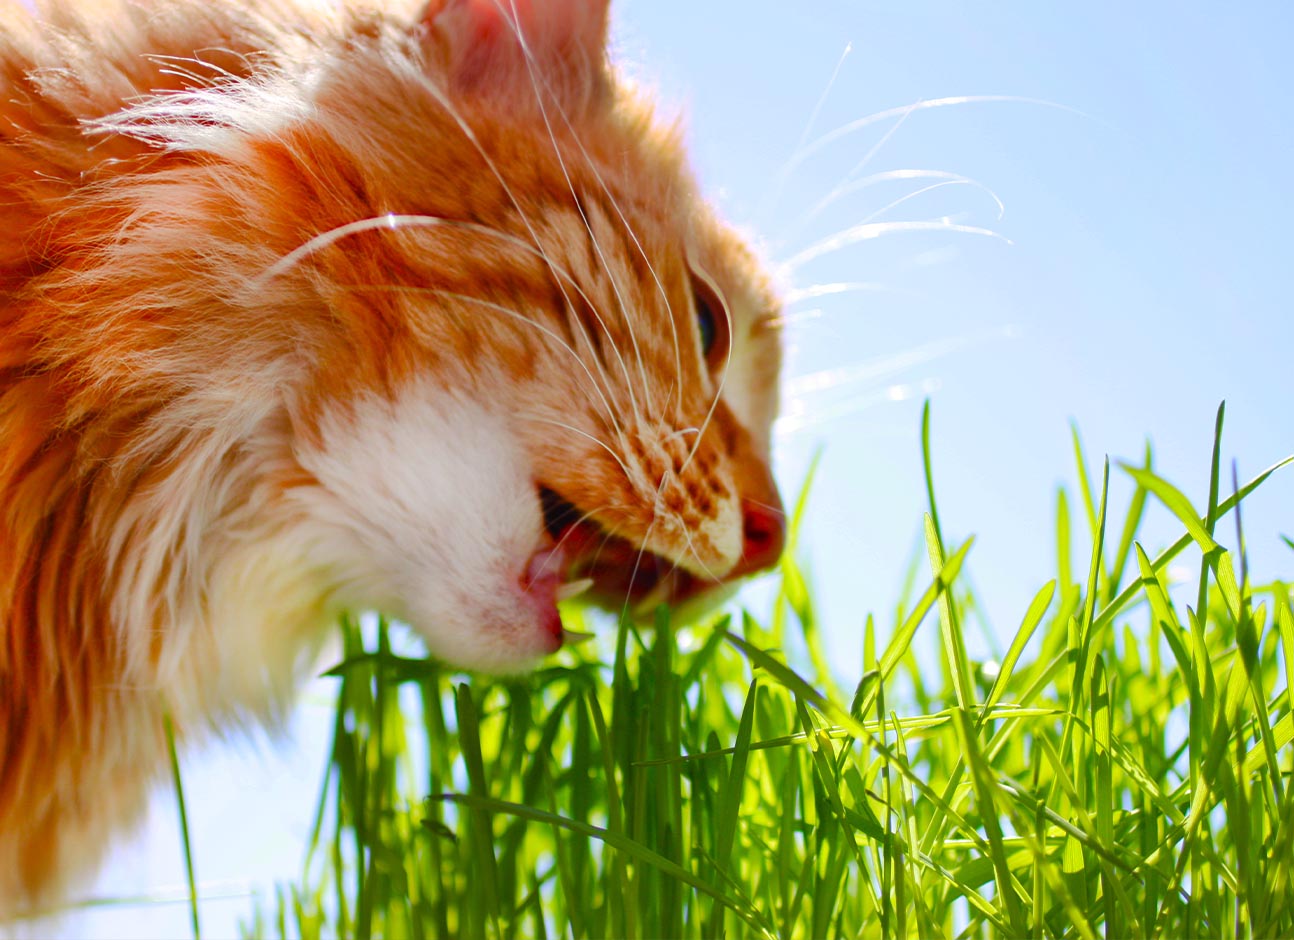 Grass and cat